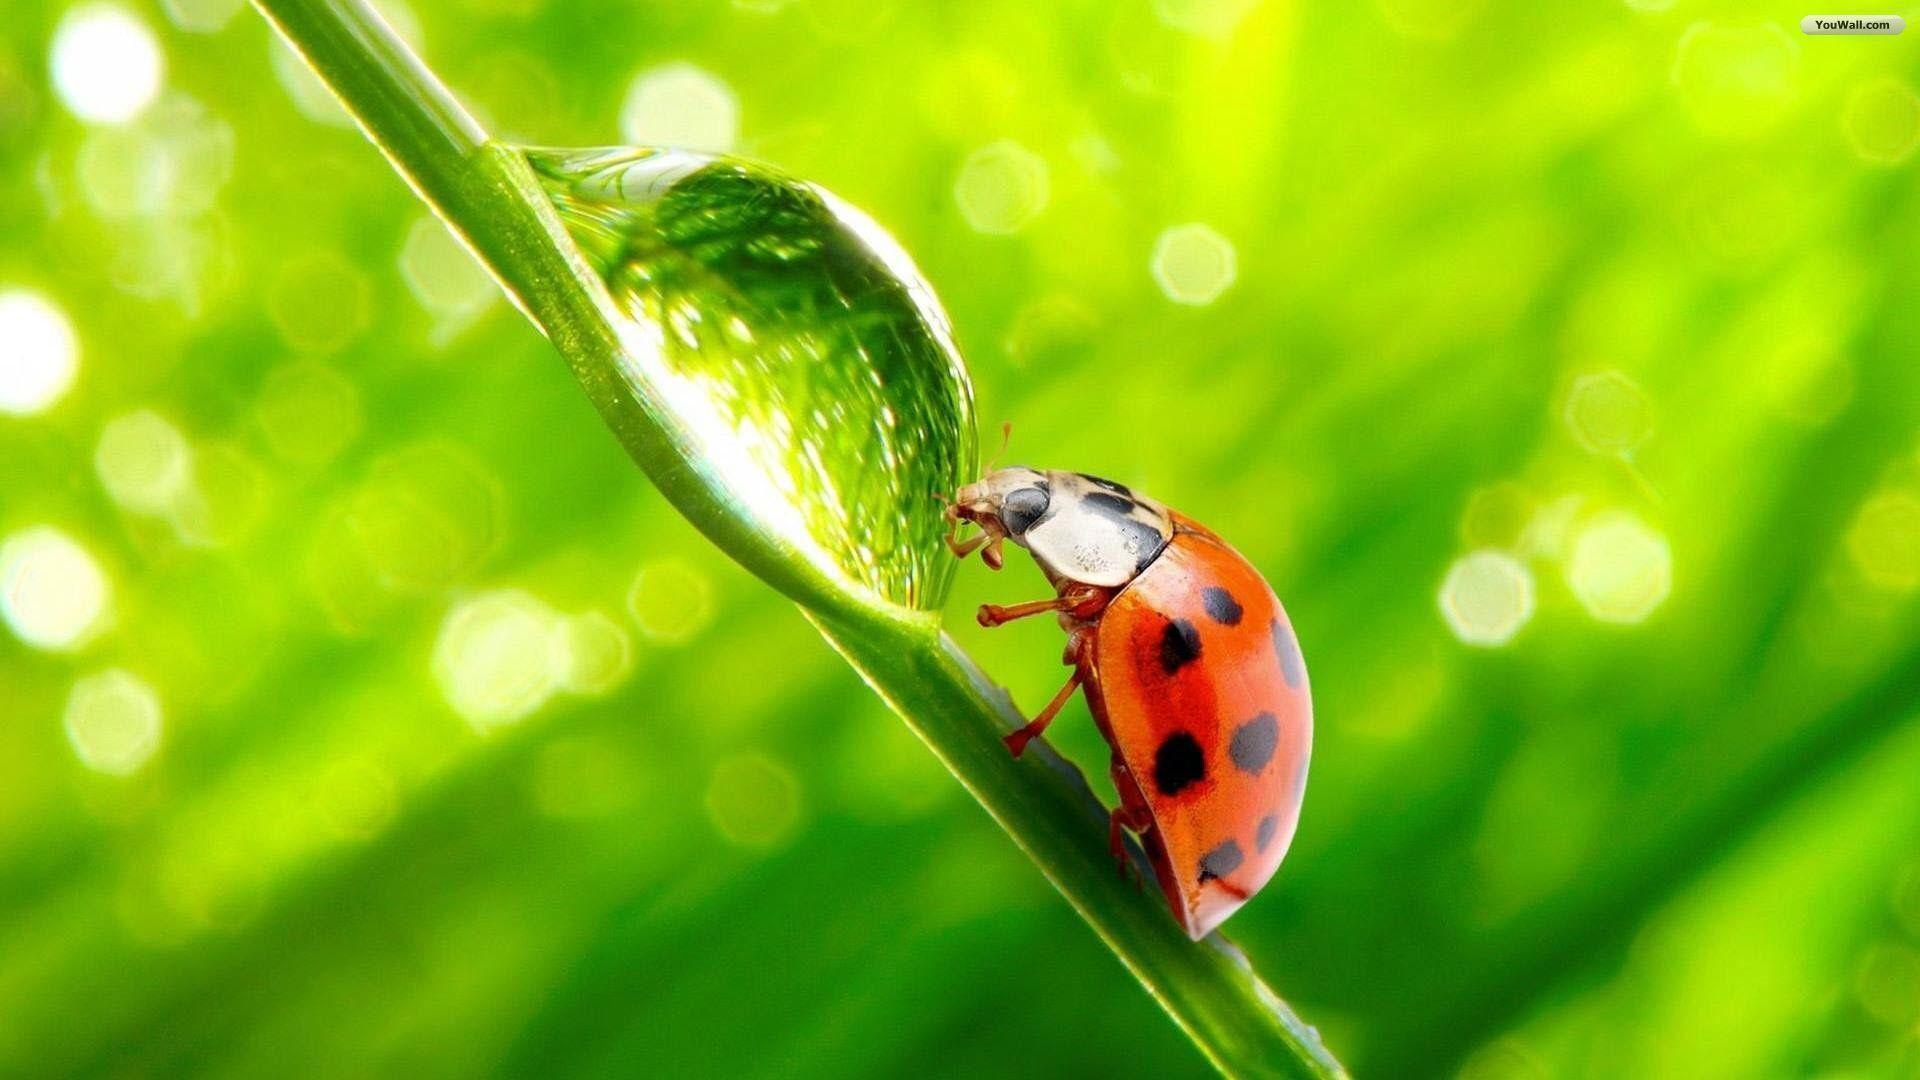 Three Bugs With Green Umbrellas HD Insects Fun Wallpaper